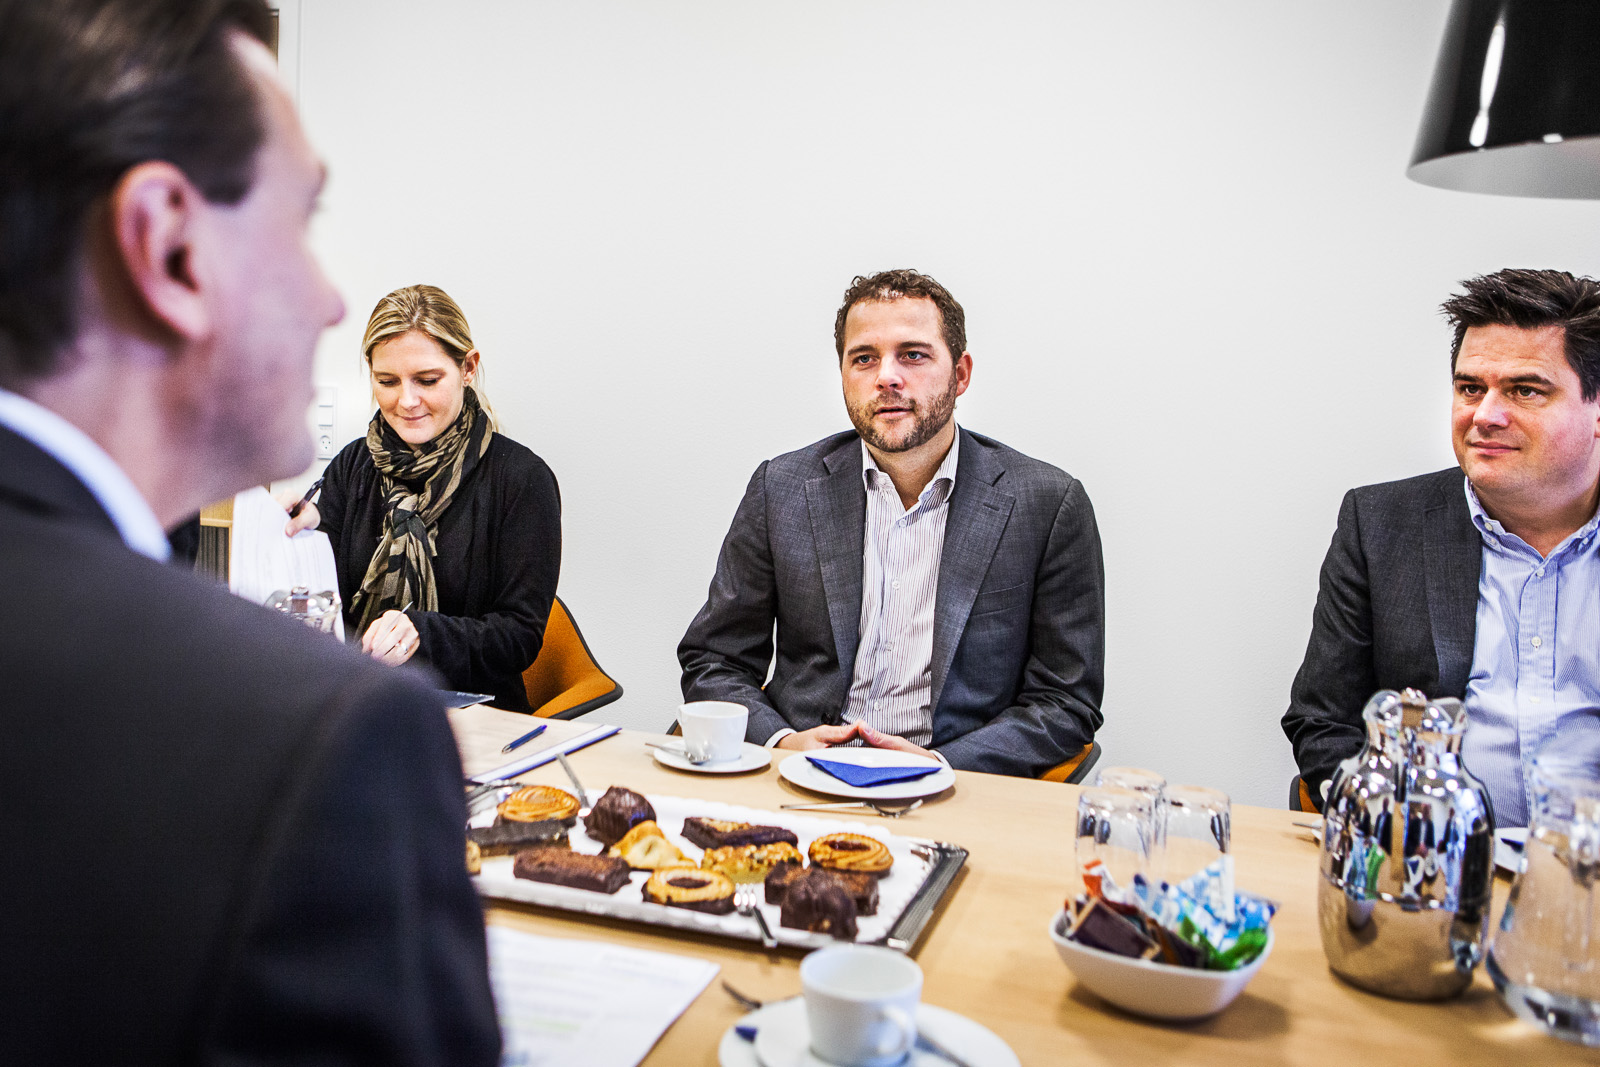 Morten Østergaard listened attentively and asked interested questions about the meeting’s topics.